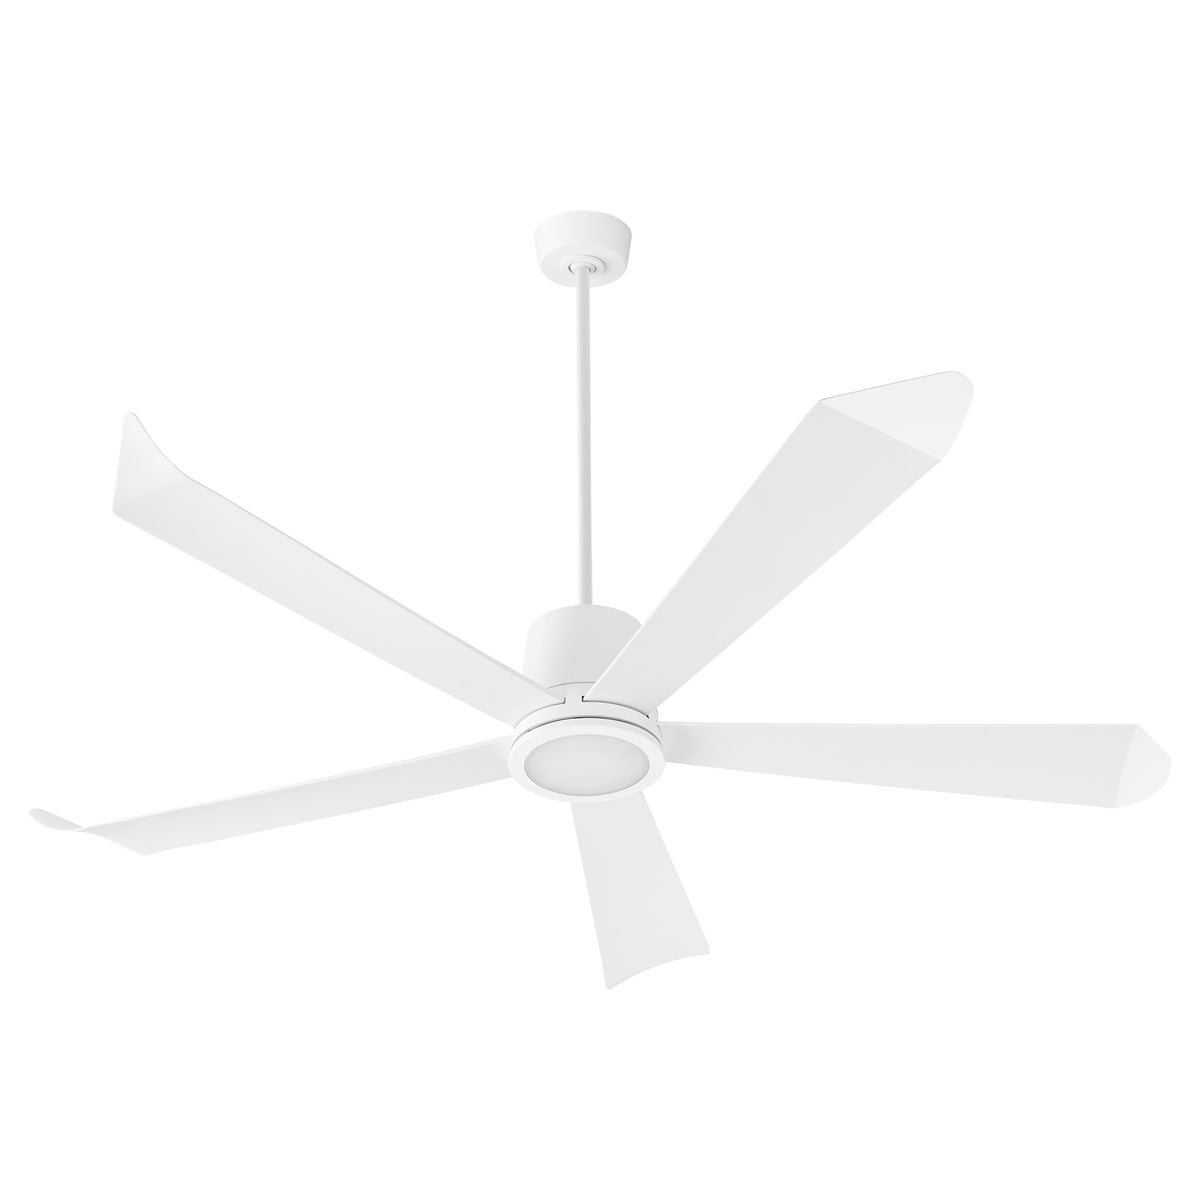 A smart ceiling fan with elongated blades and optional light kits. Perfect for living rooms, home offices, or bedrooms. Brand: Quorum International. Motor Size: DC-165NM. Watts: 26/19/15/11/8/5. Amps: .30/.24/.20/.15/.11/.08. RPMs: 90/82/74/60/59/52. Number of Blades: 5. Blade Pitch: 13 Degrees. Certifications: UL Listed. Safety Rating: Damp Location. Finish: Aged Brass, Matte Black, Satin Nickel, Studio White. Dimensions: 15"H x 72"W. Warranty: Limited Lifetime.